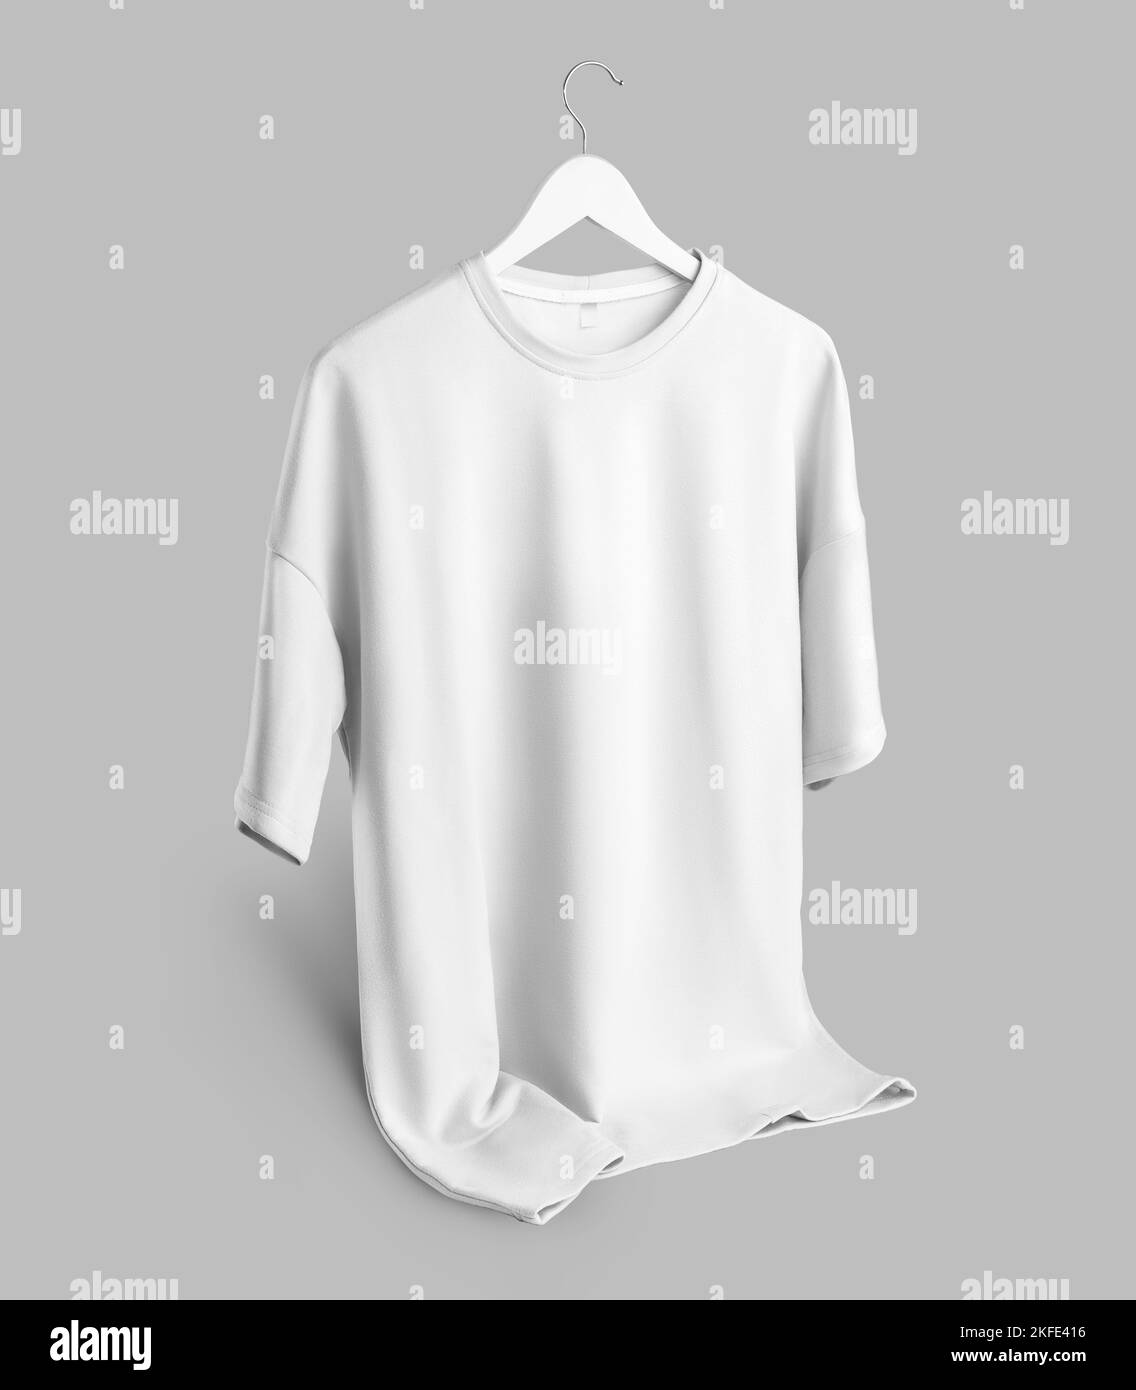 Mockup of an oversized white t-shirt with a round neckline hanging on a hanger with the bottom turned up, isolated on background, front view. Blank cl Stock Photo